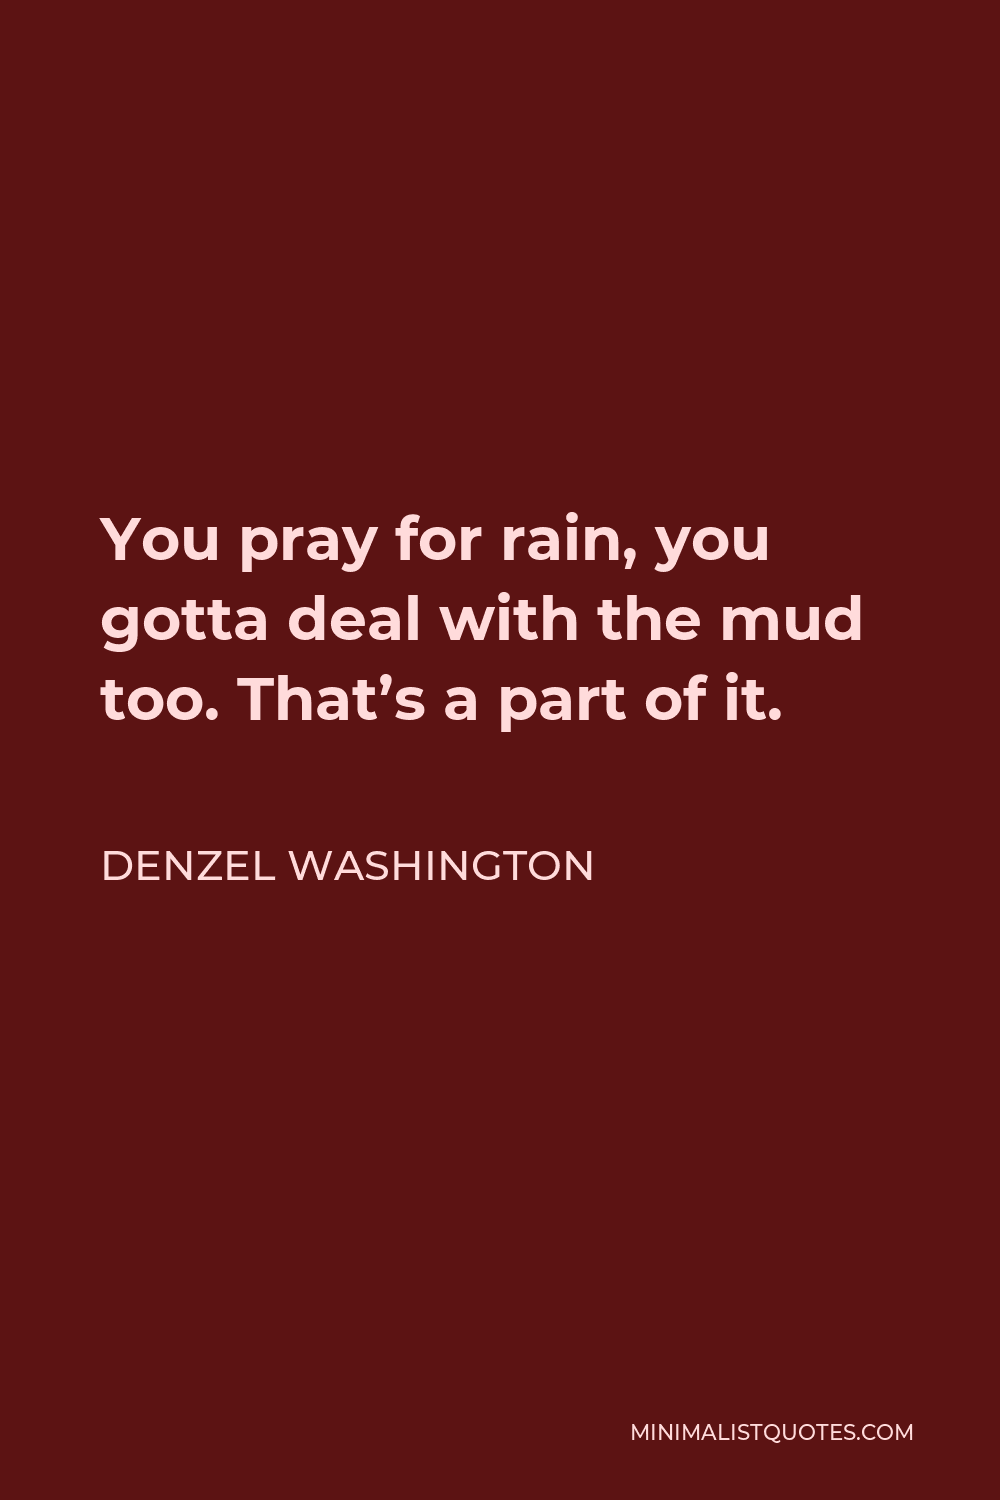 Denzel Washington Quote - You pray for rain, you gotta deal with the mud too. That’s a part of it.